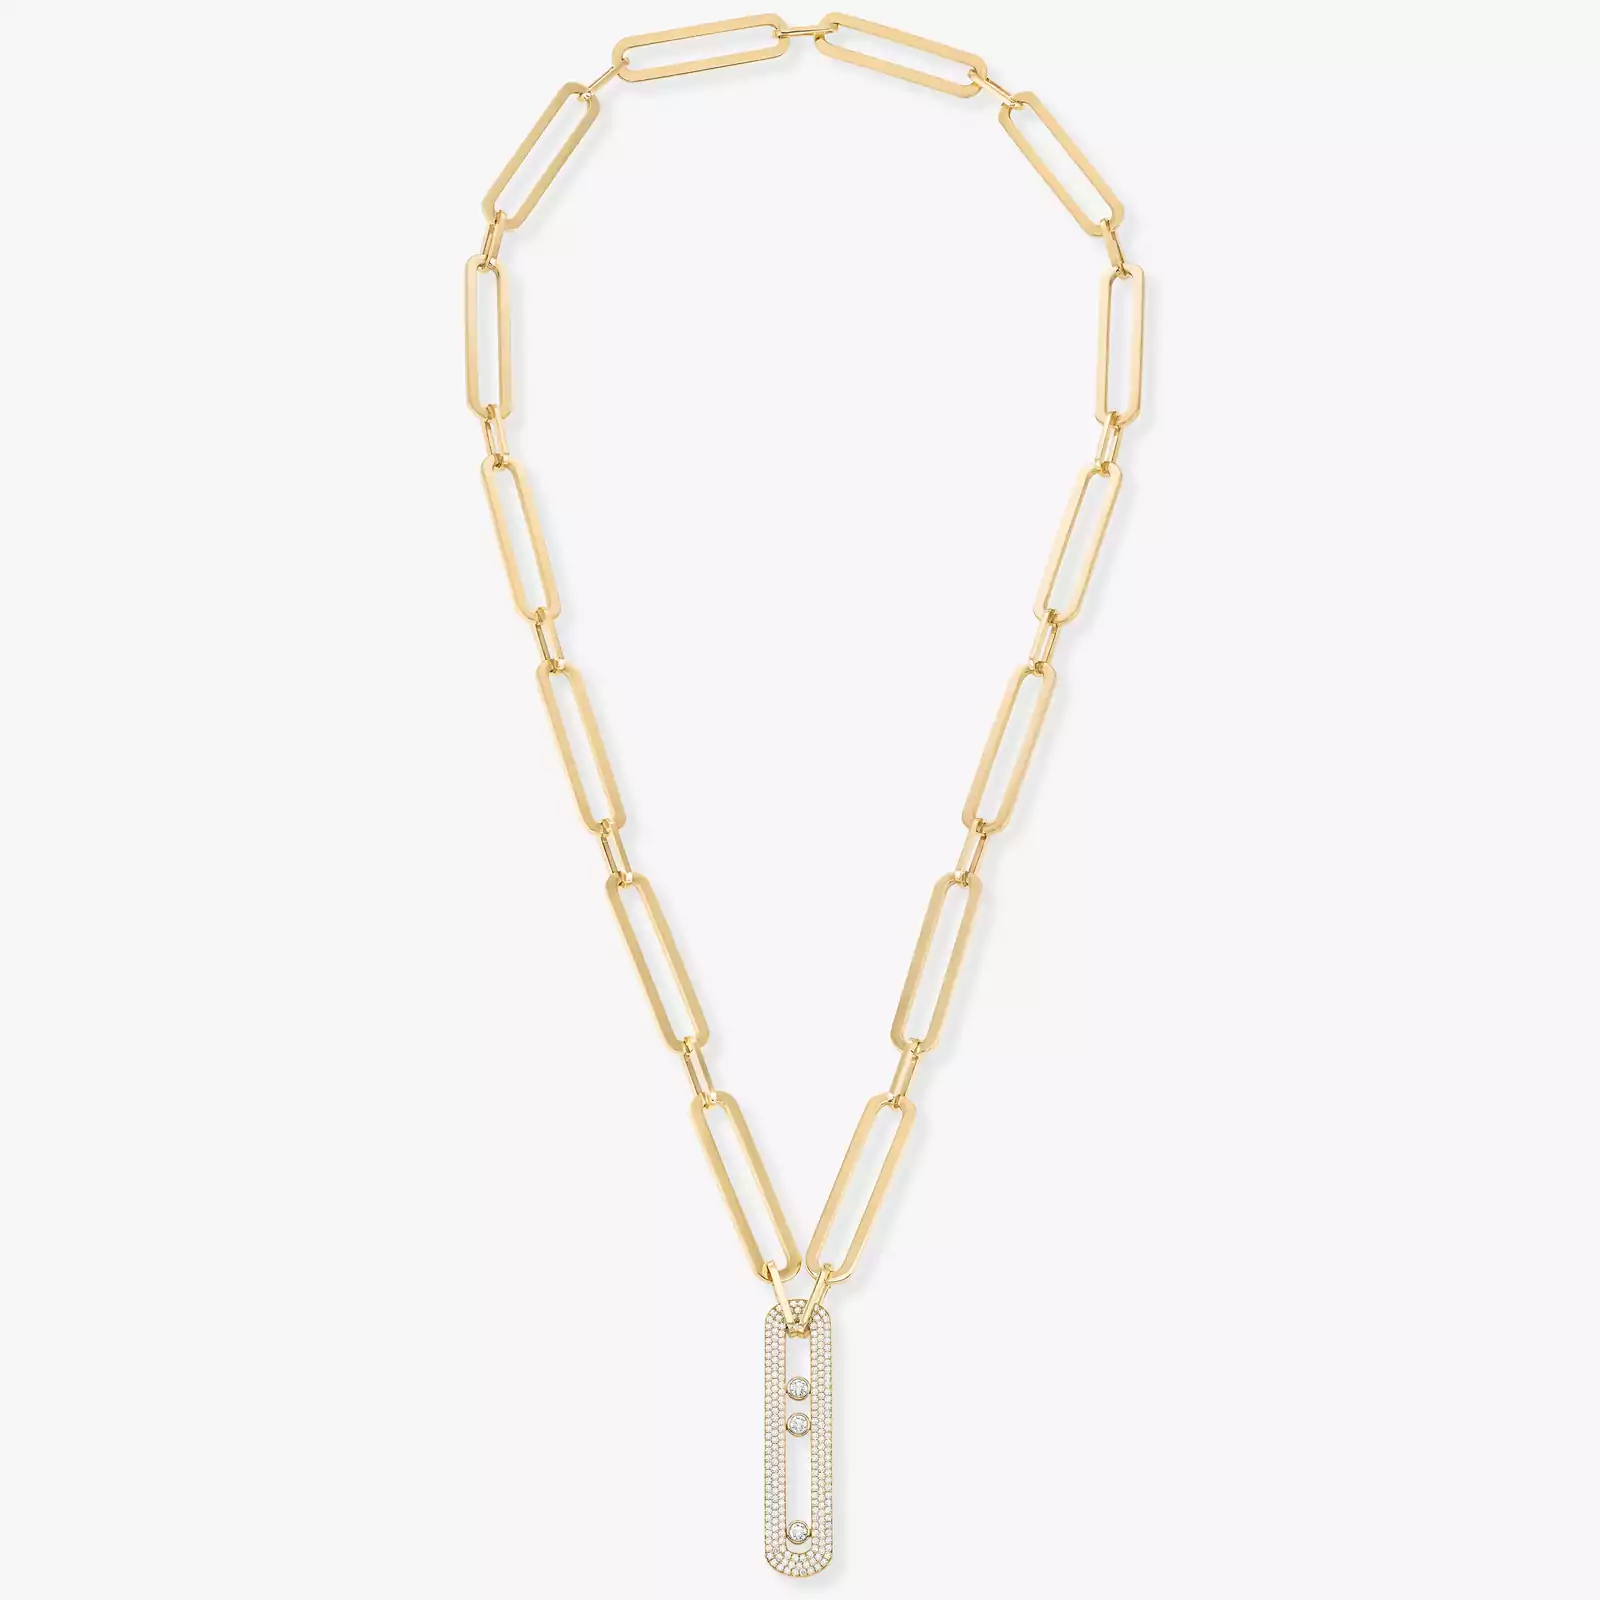 Sautoir Move 10th Anniversary XL Yellow Gold For Her Diamond Necklace 06768-YG